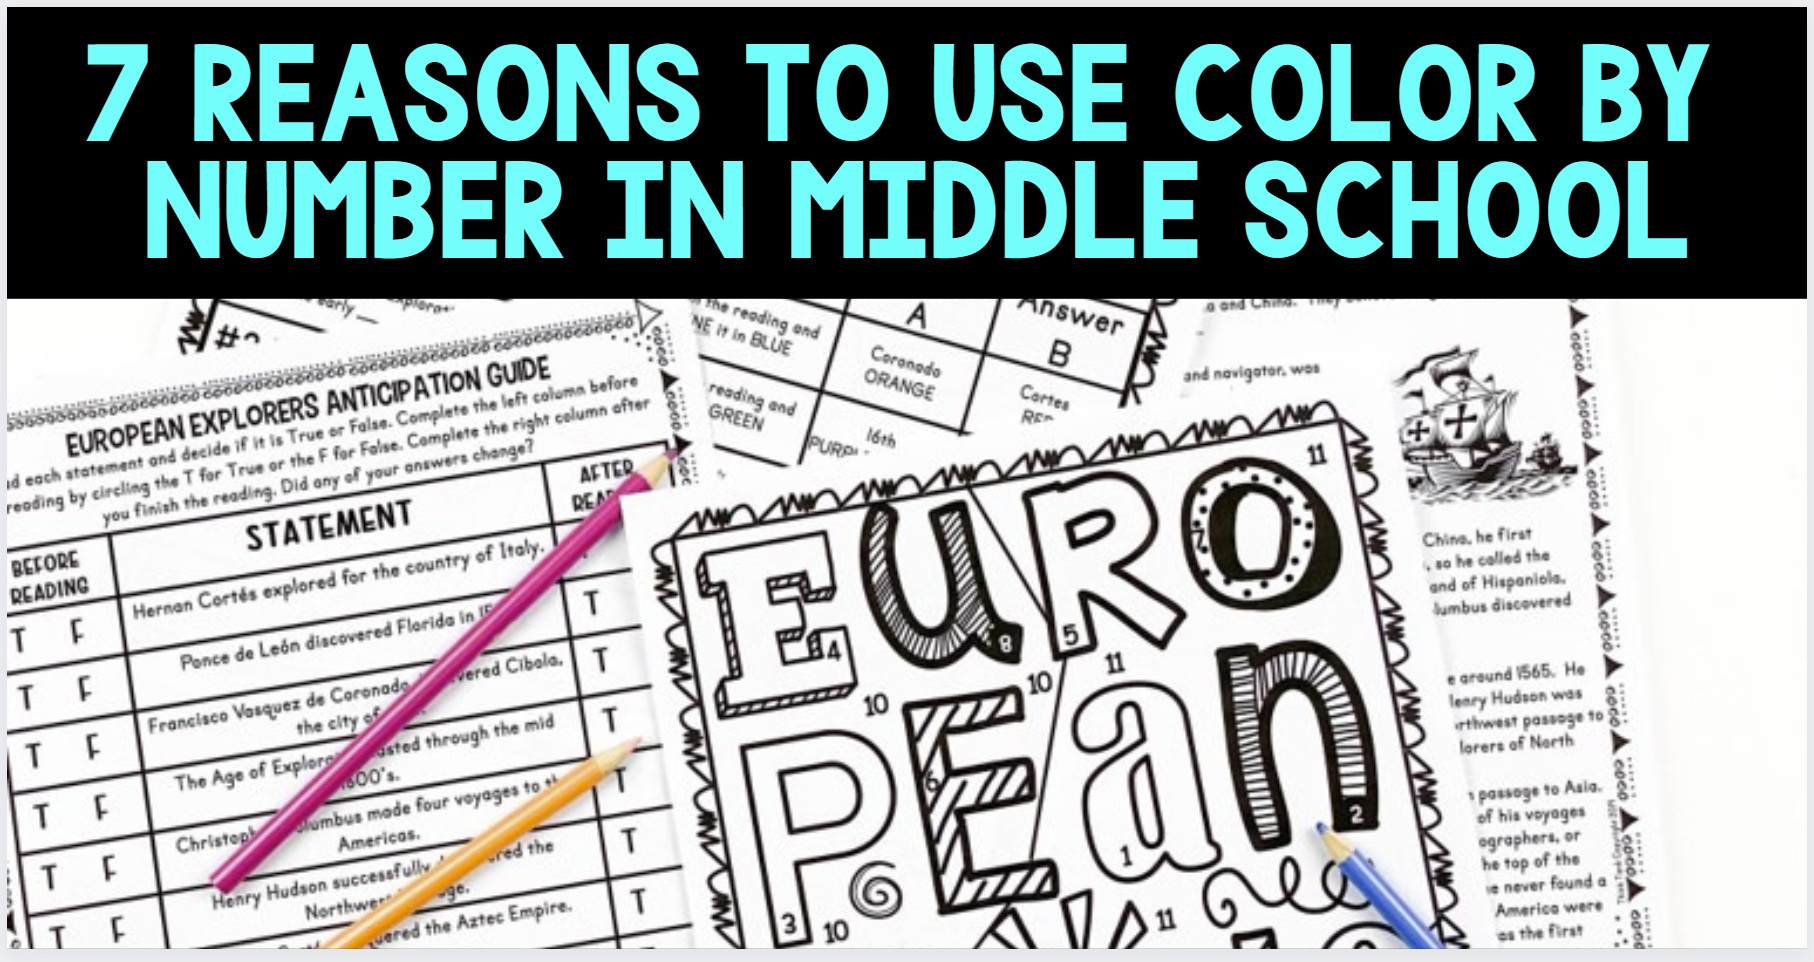 7 reasons to use color by number in middles school blog cover